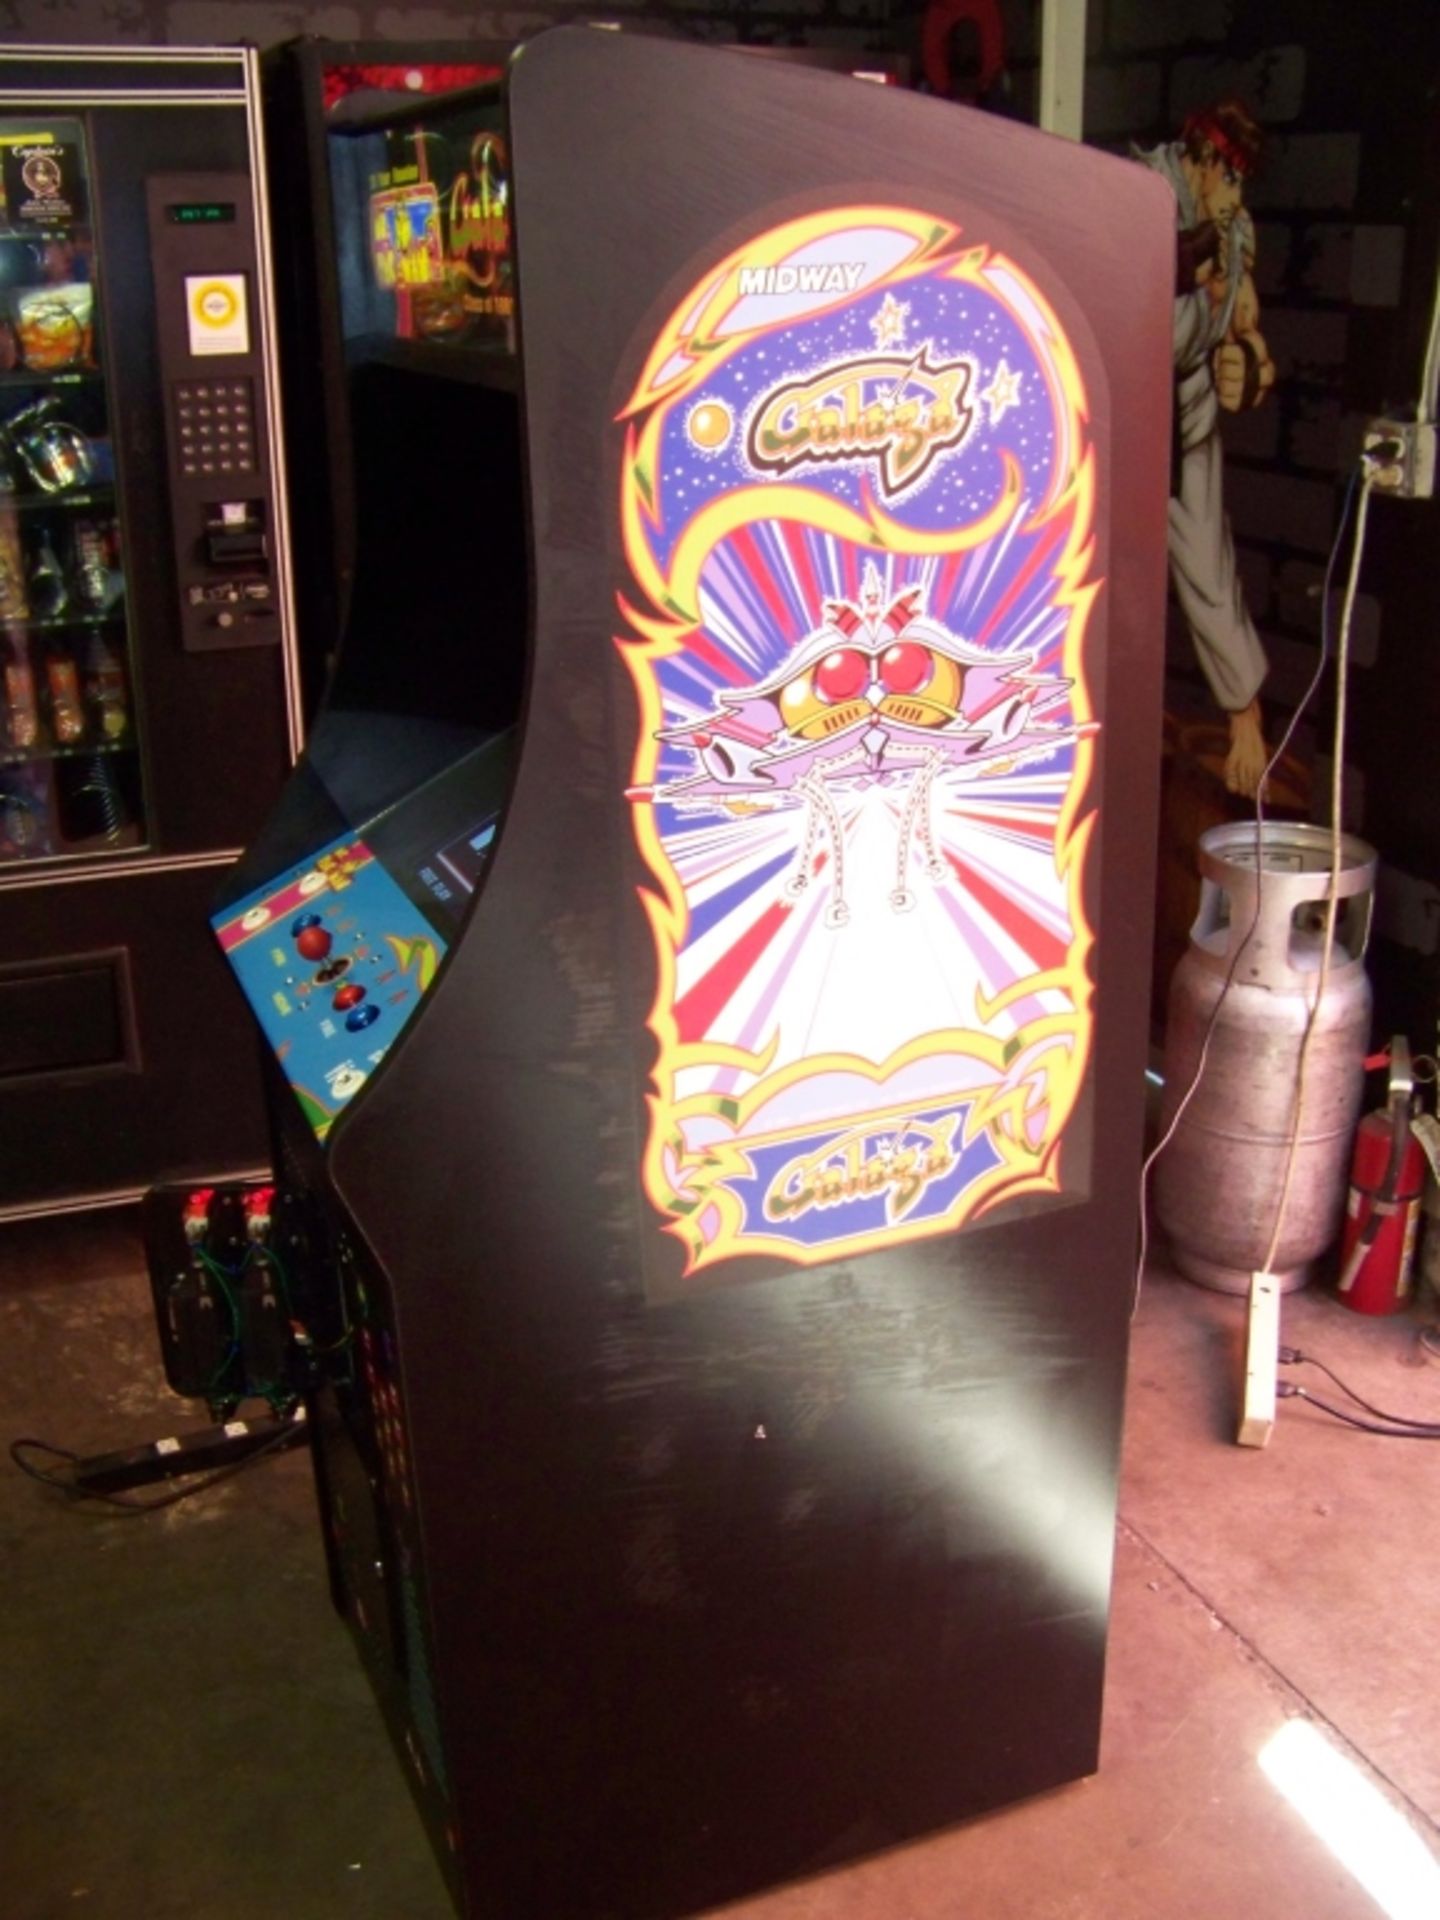 GALAGA MS. PACMAN COMBO BRAND NEW ARCADE GAME LCD Check pictures for details. NOTE: THIS IS A - Image 5 of 7